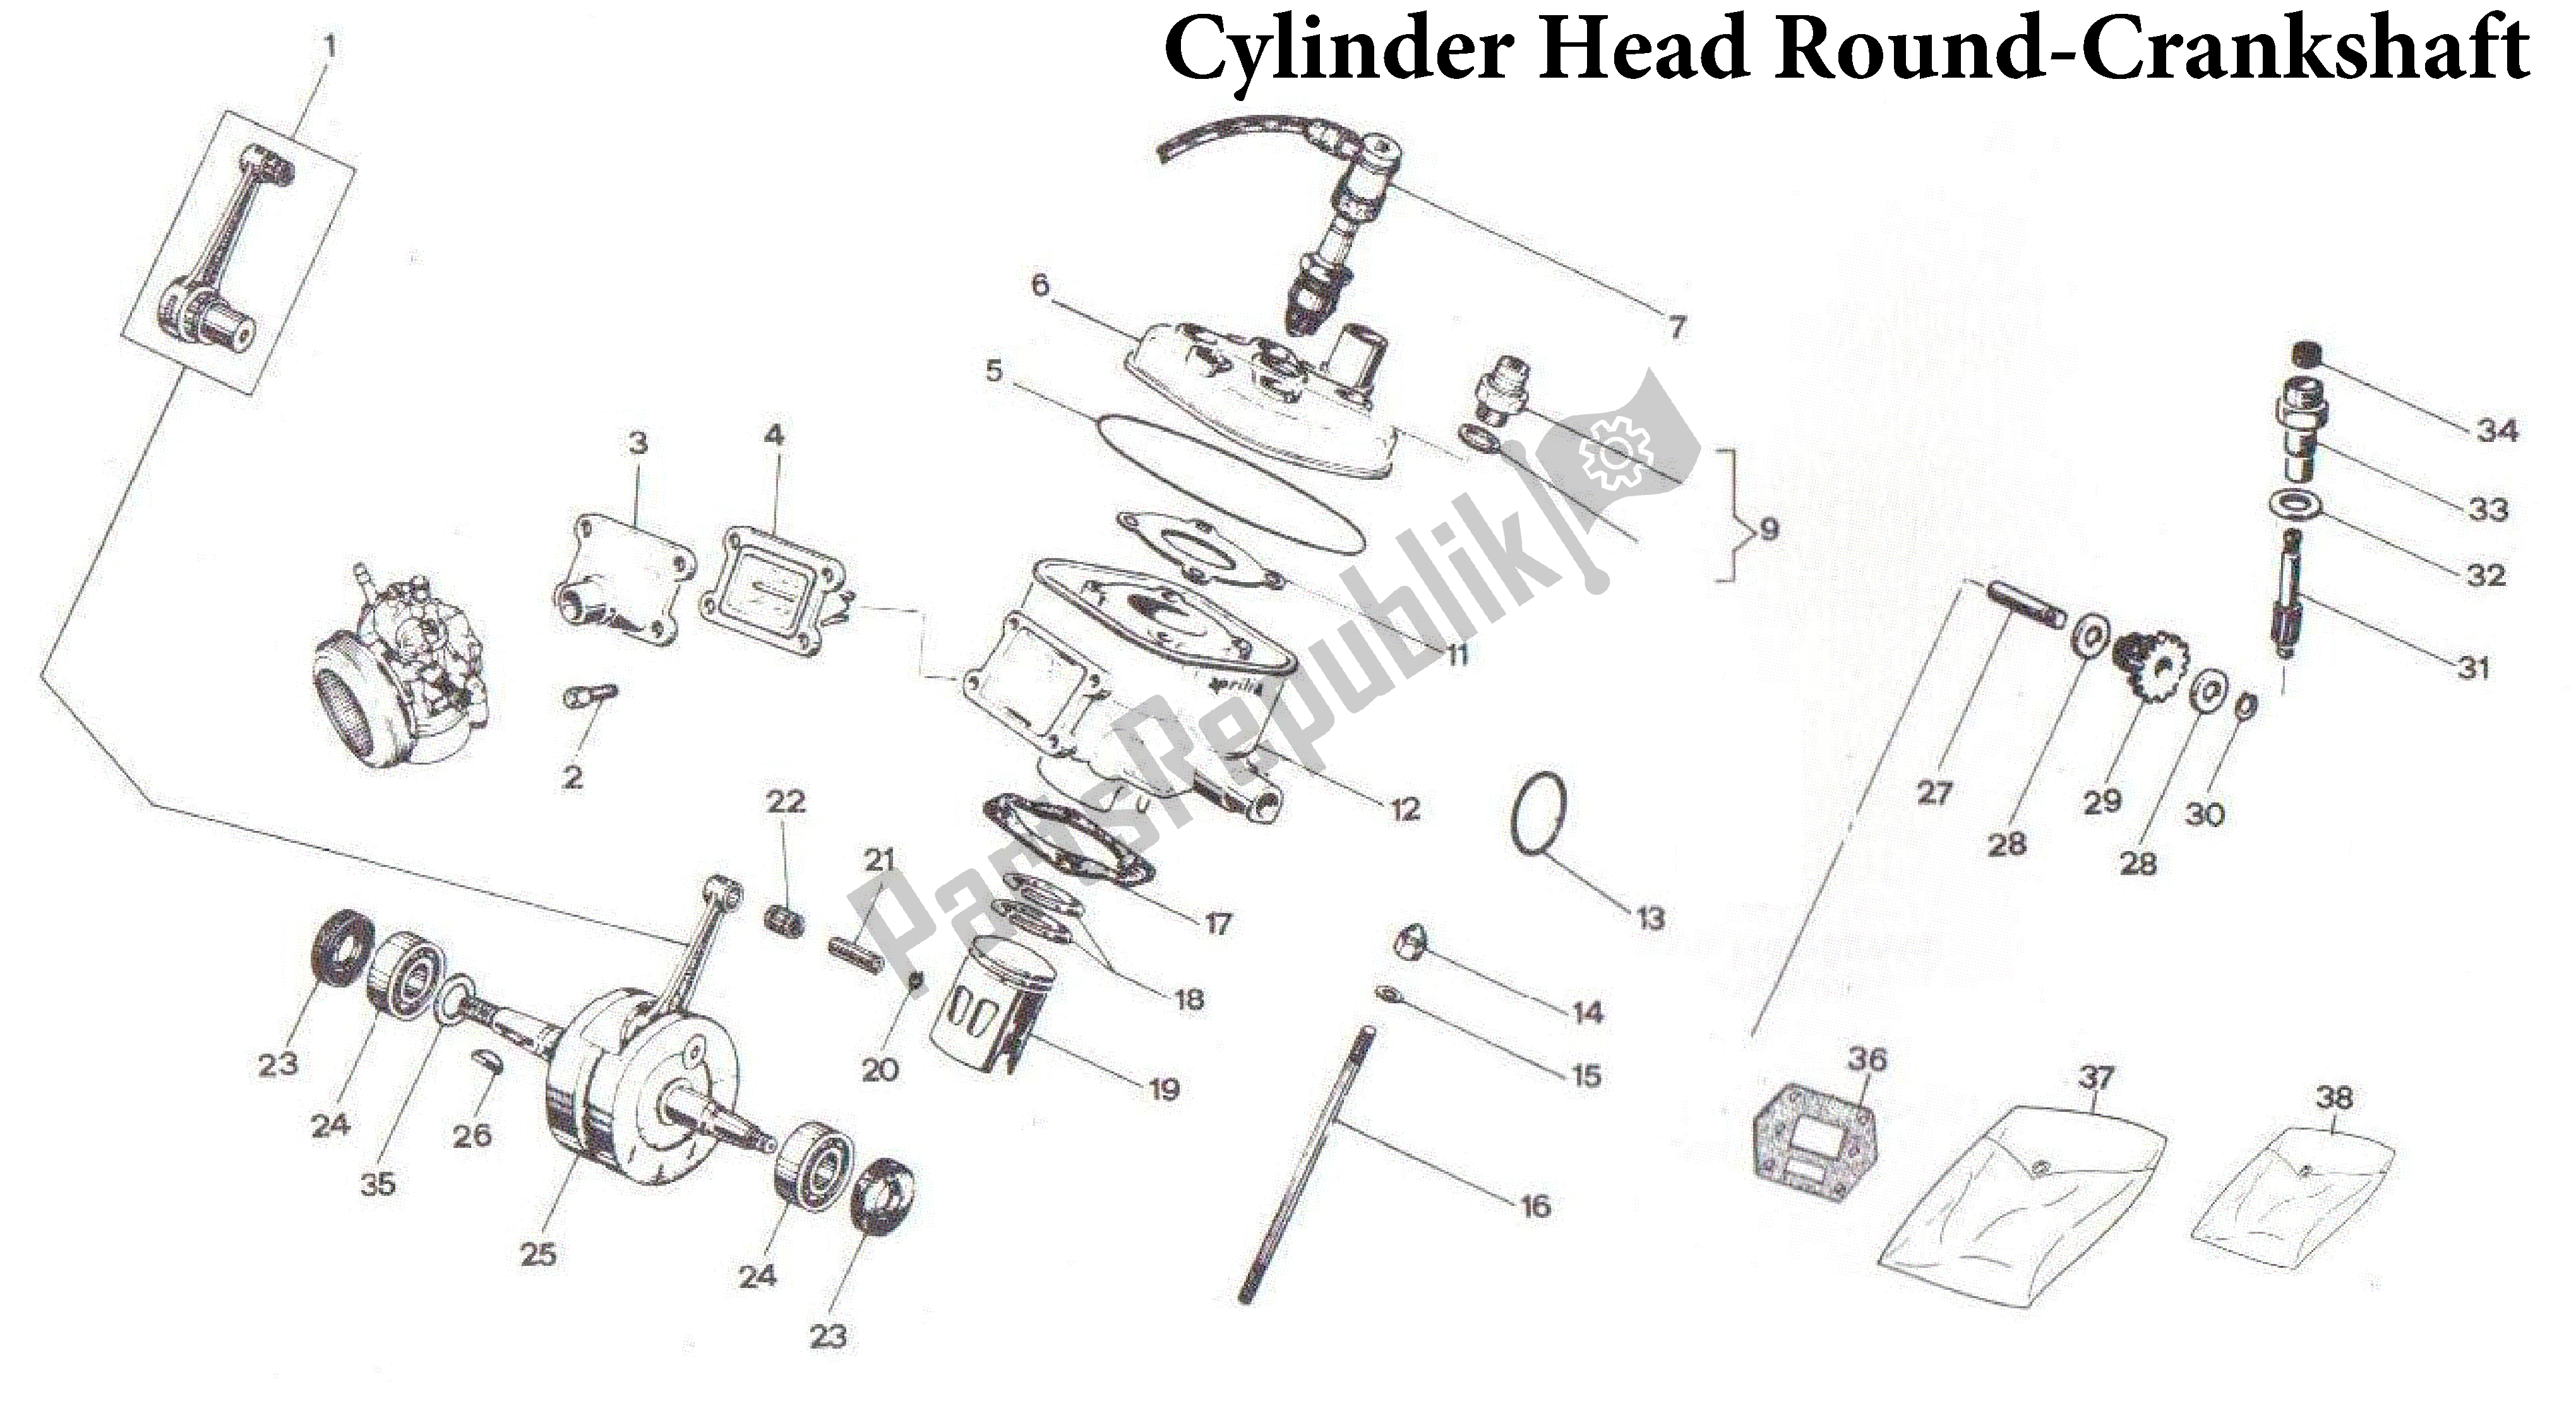 All parts for the Cylinder Head Round-crankshaft of the Aprilia RX 50 1990